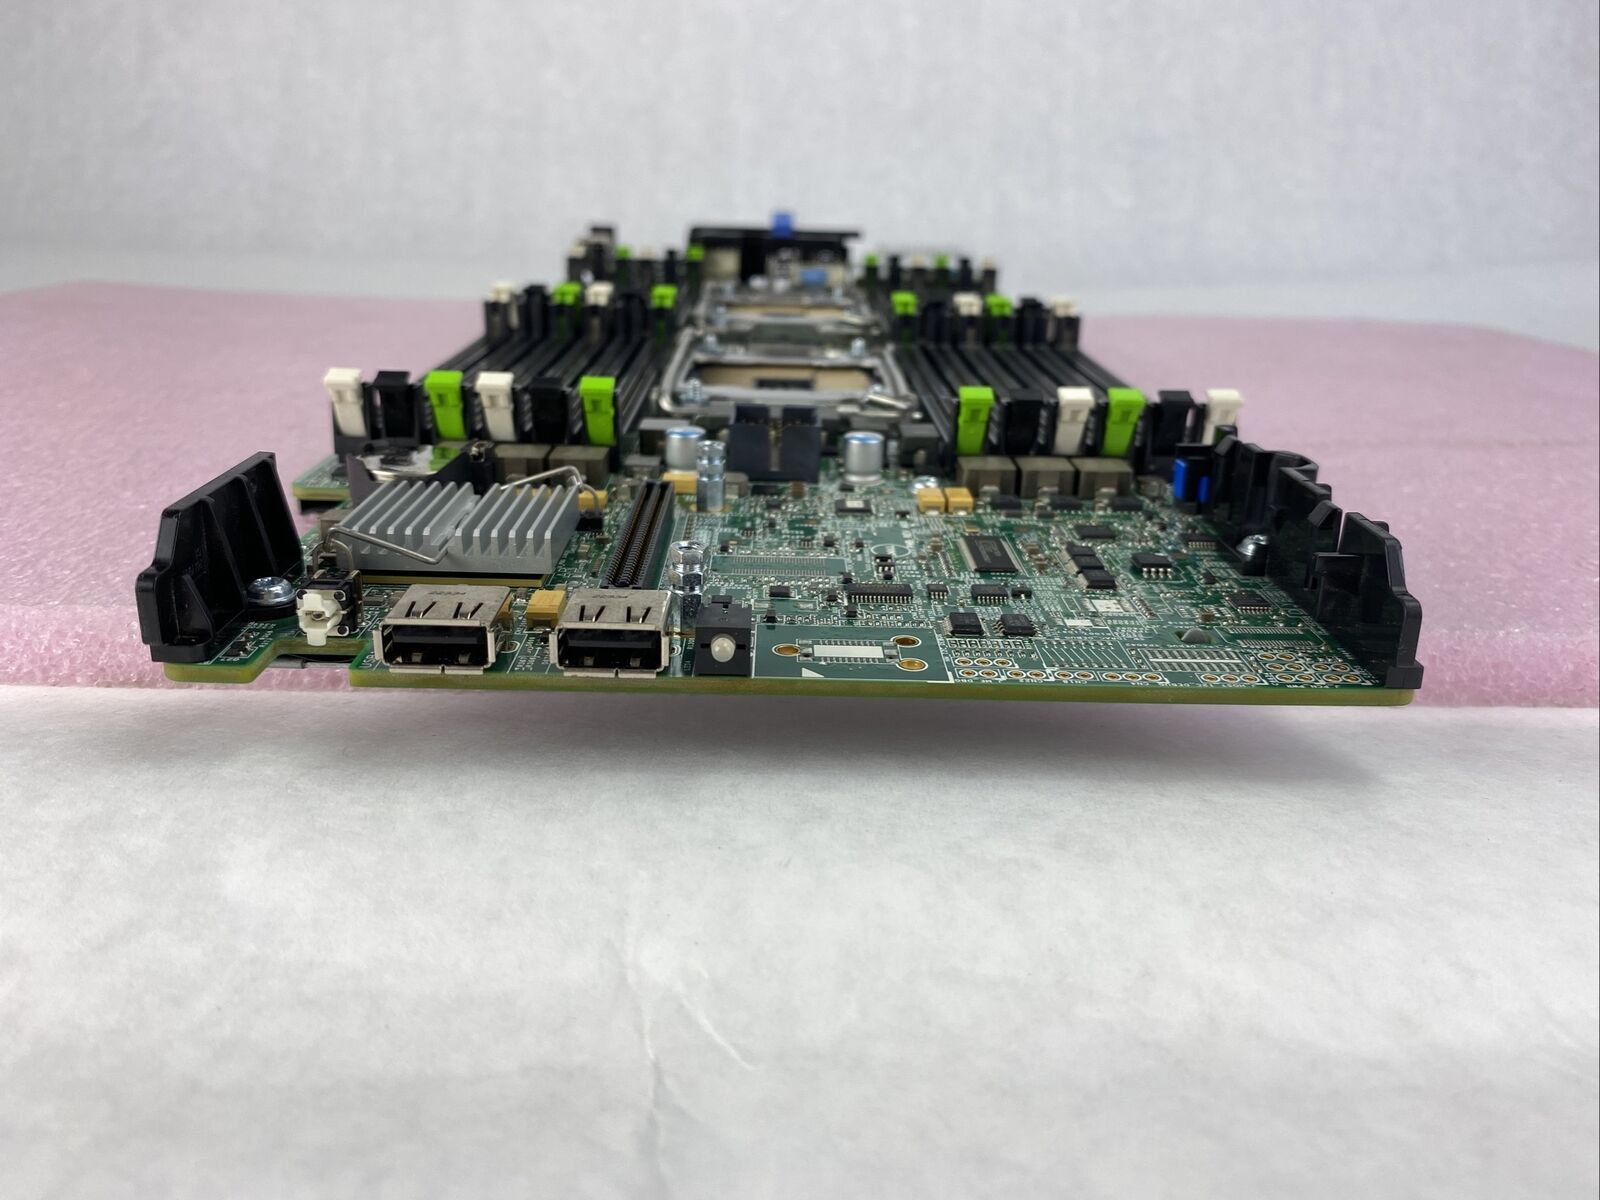 Dell 0VHRN7 System Board Motherboard for Poweredge M620 Blade